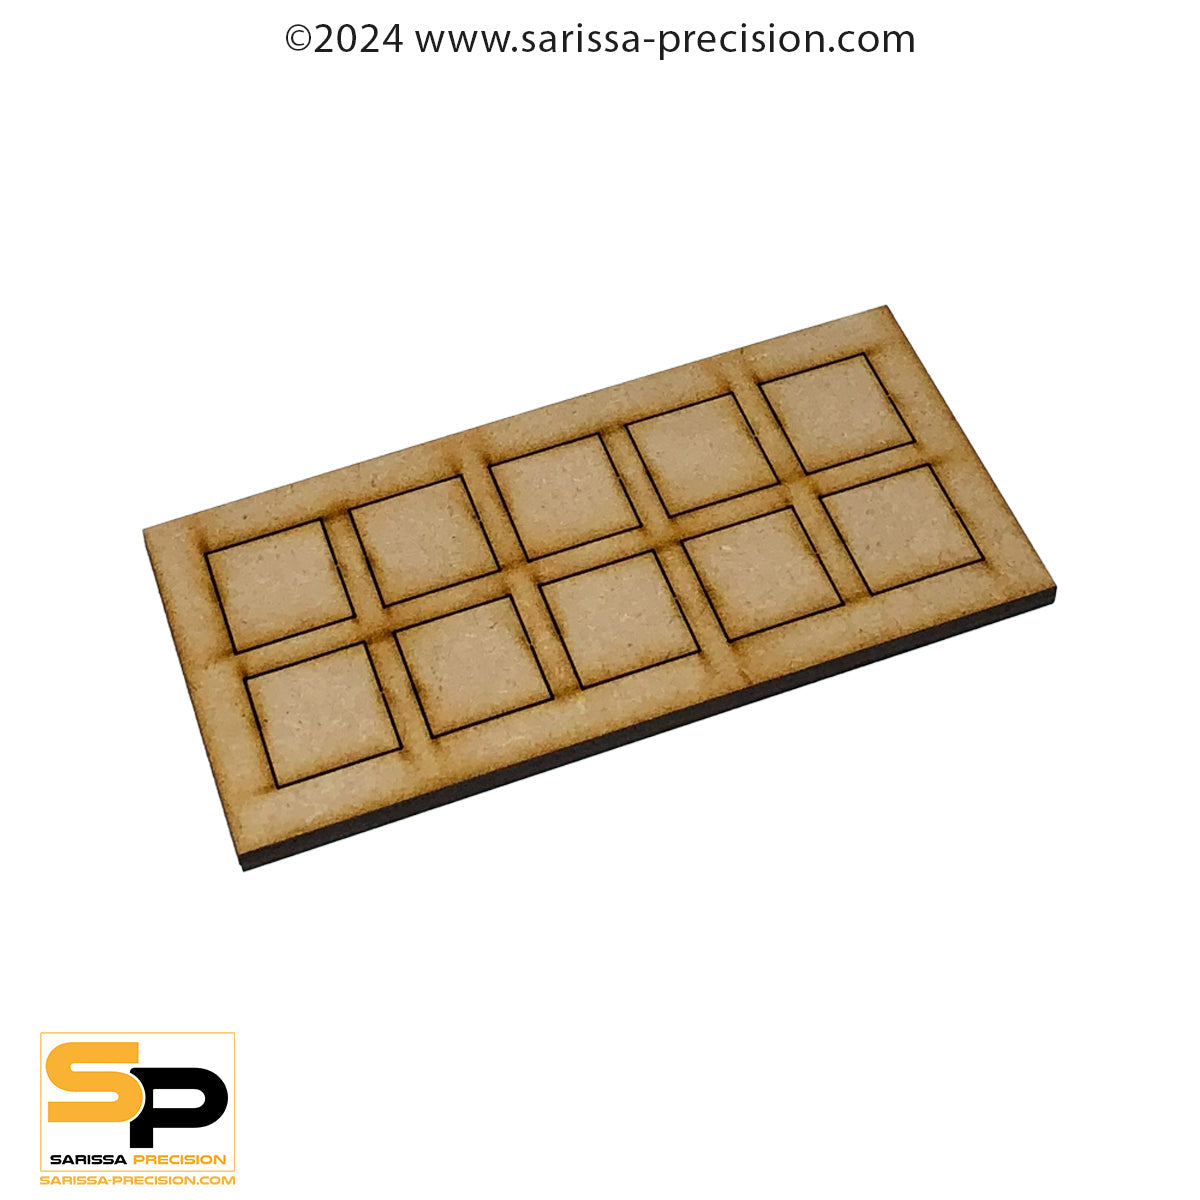 14x1 25x25mm Conversion Tray for 20x20mm bases